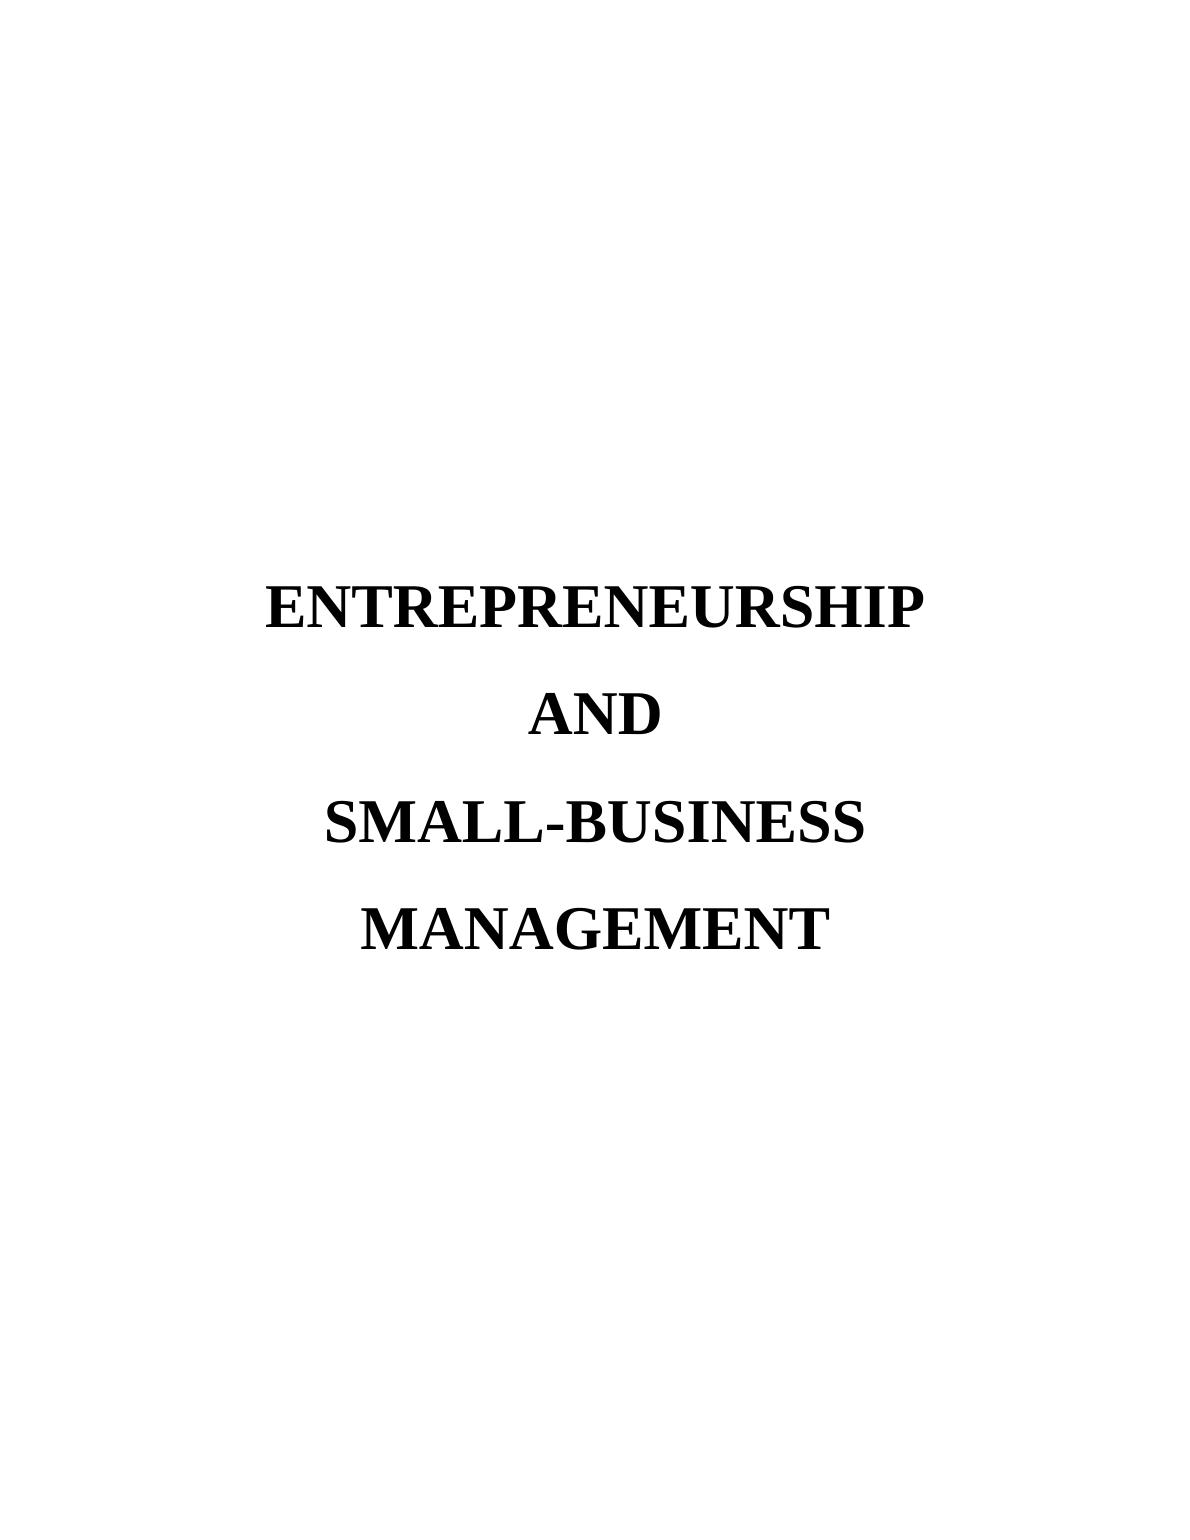 Entrepreneurship and Small Business Management Project Report_1